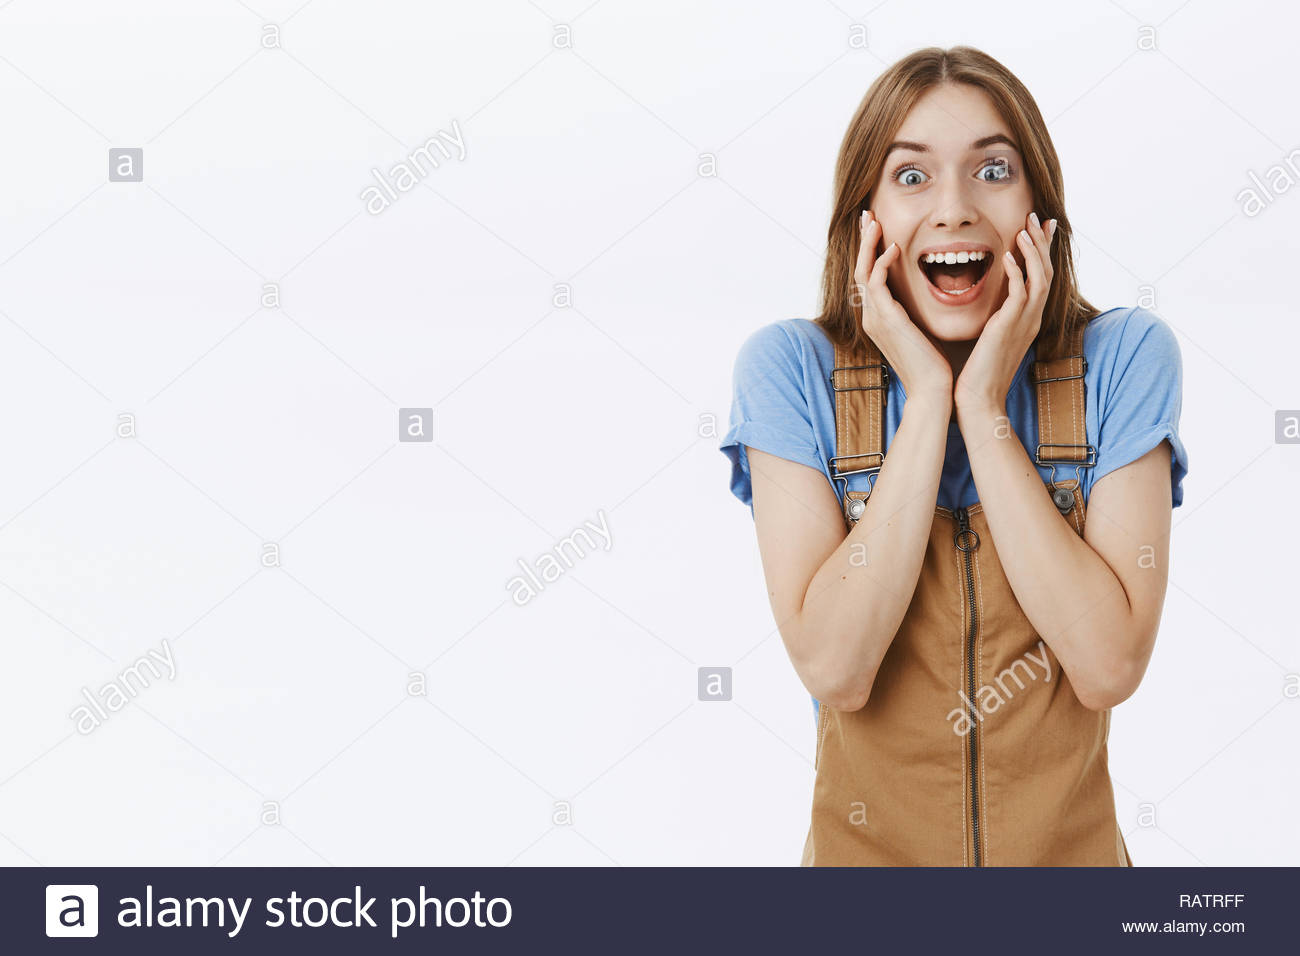 Girl Fascinated With Awesome News Reacting Joyfully And Excited